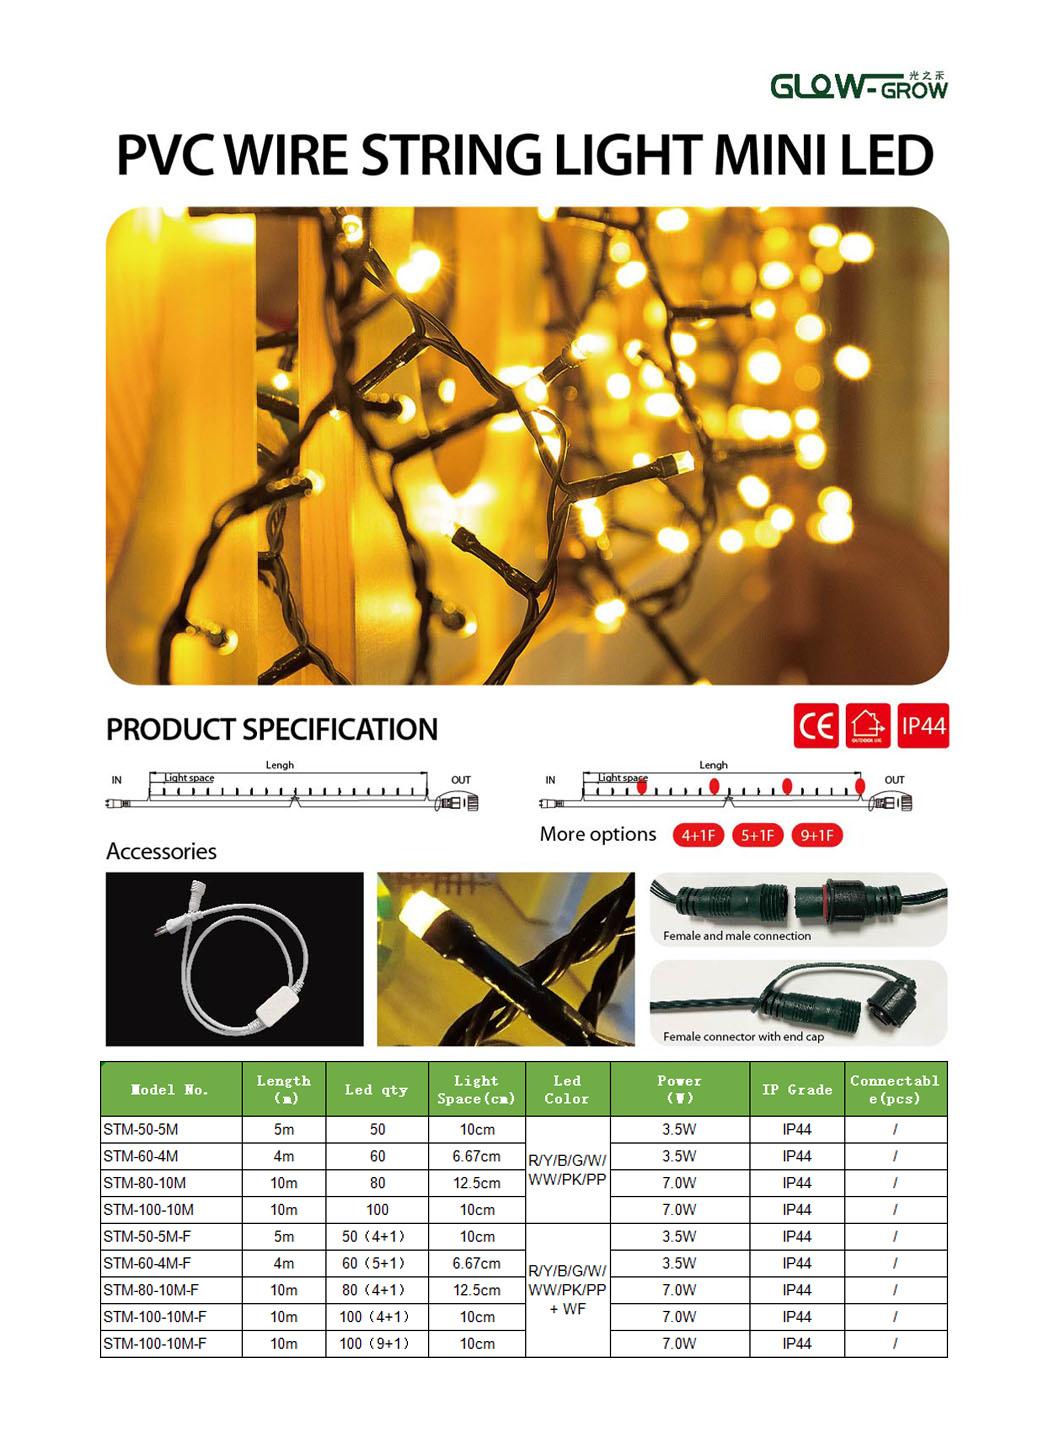 Outdoor Christmas Fairy Light Solar Powered String Tree Light for Wedding Party Home Street Holiday Halloween Decoration